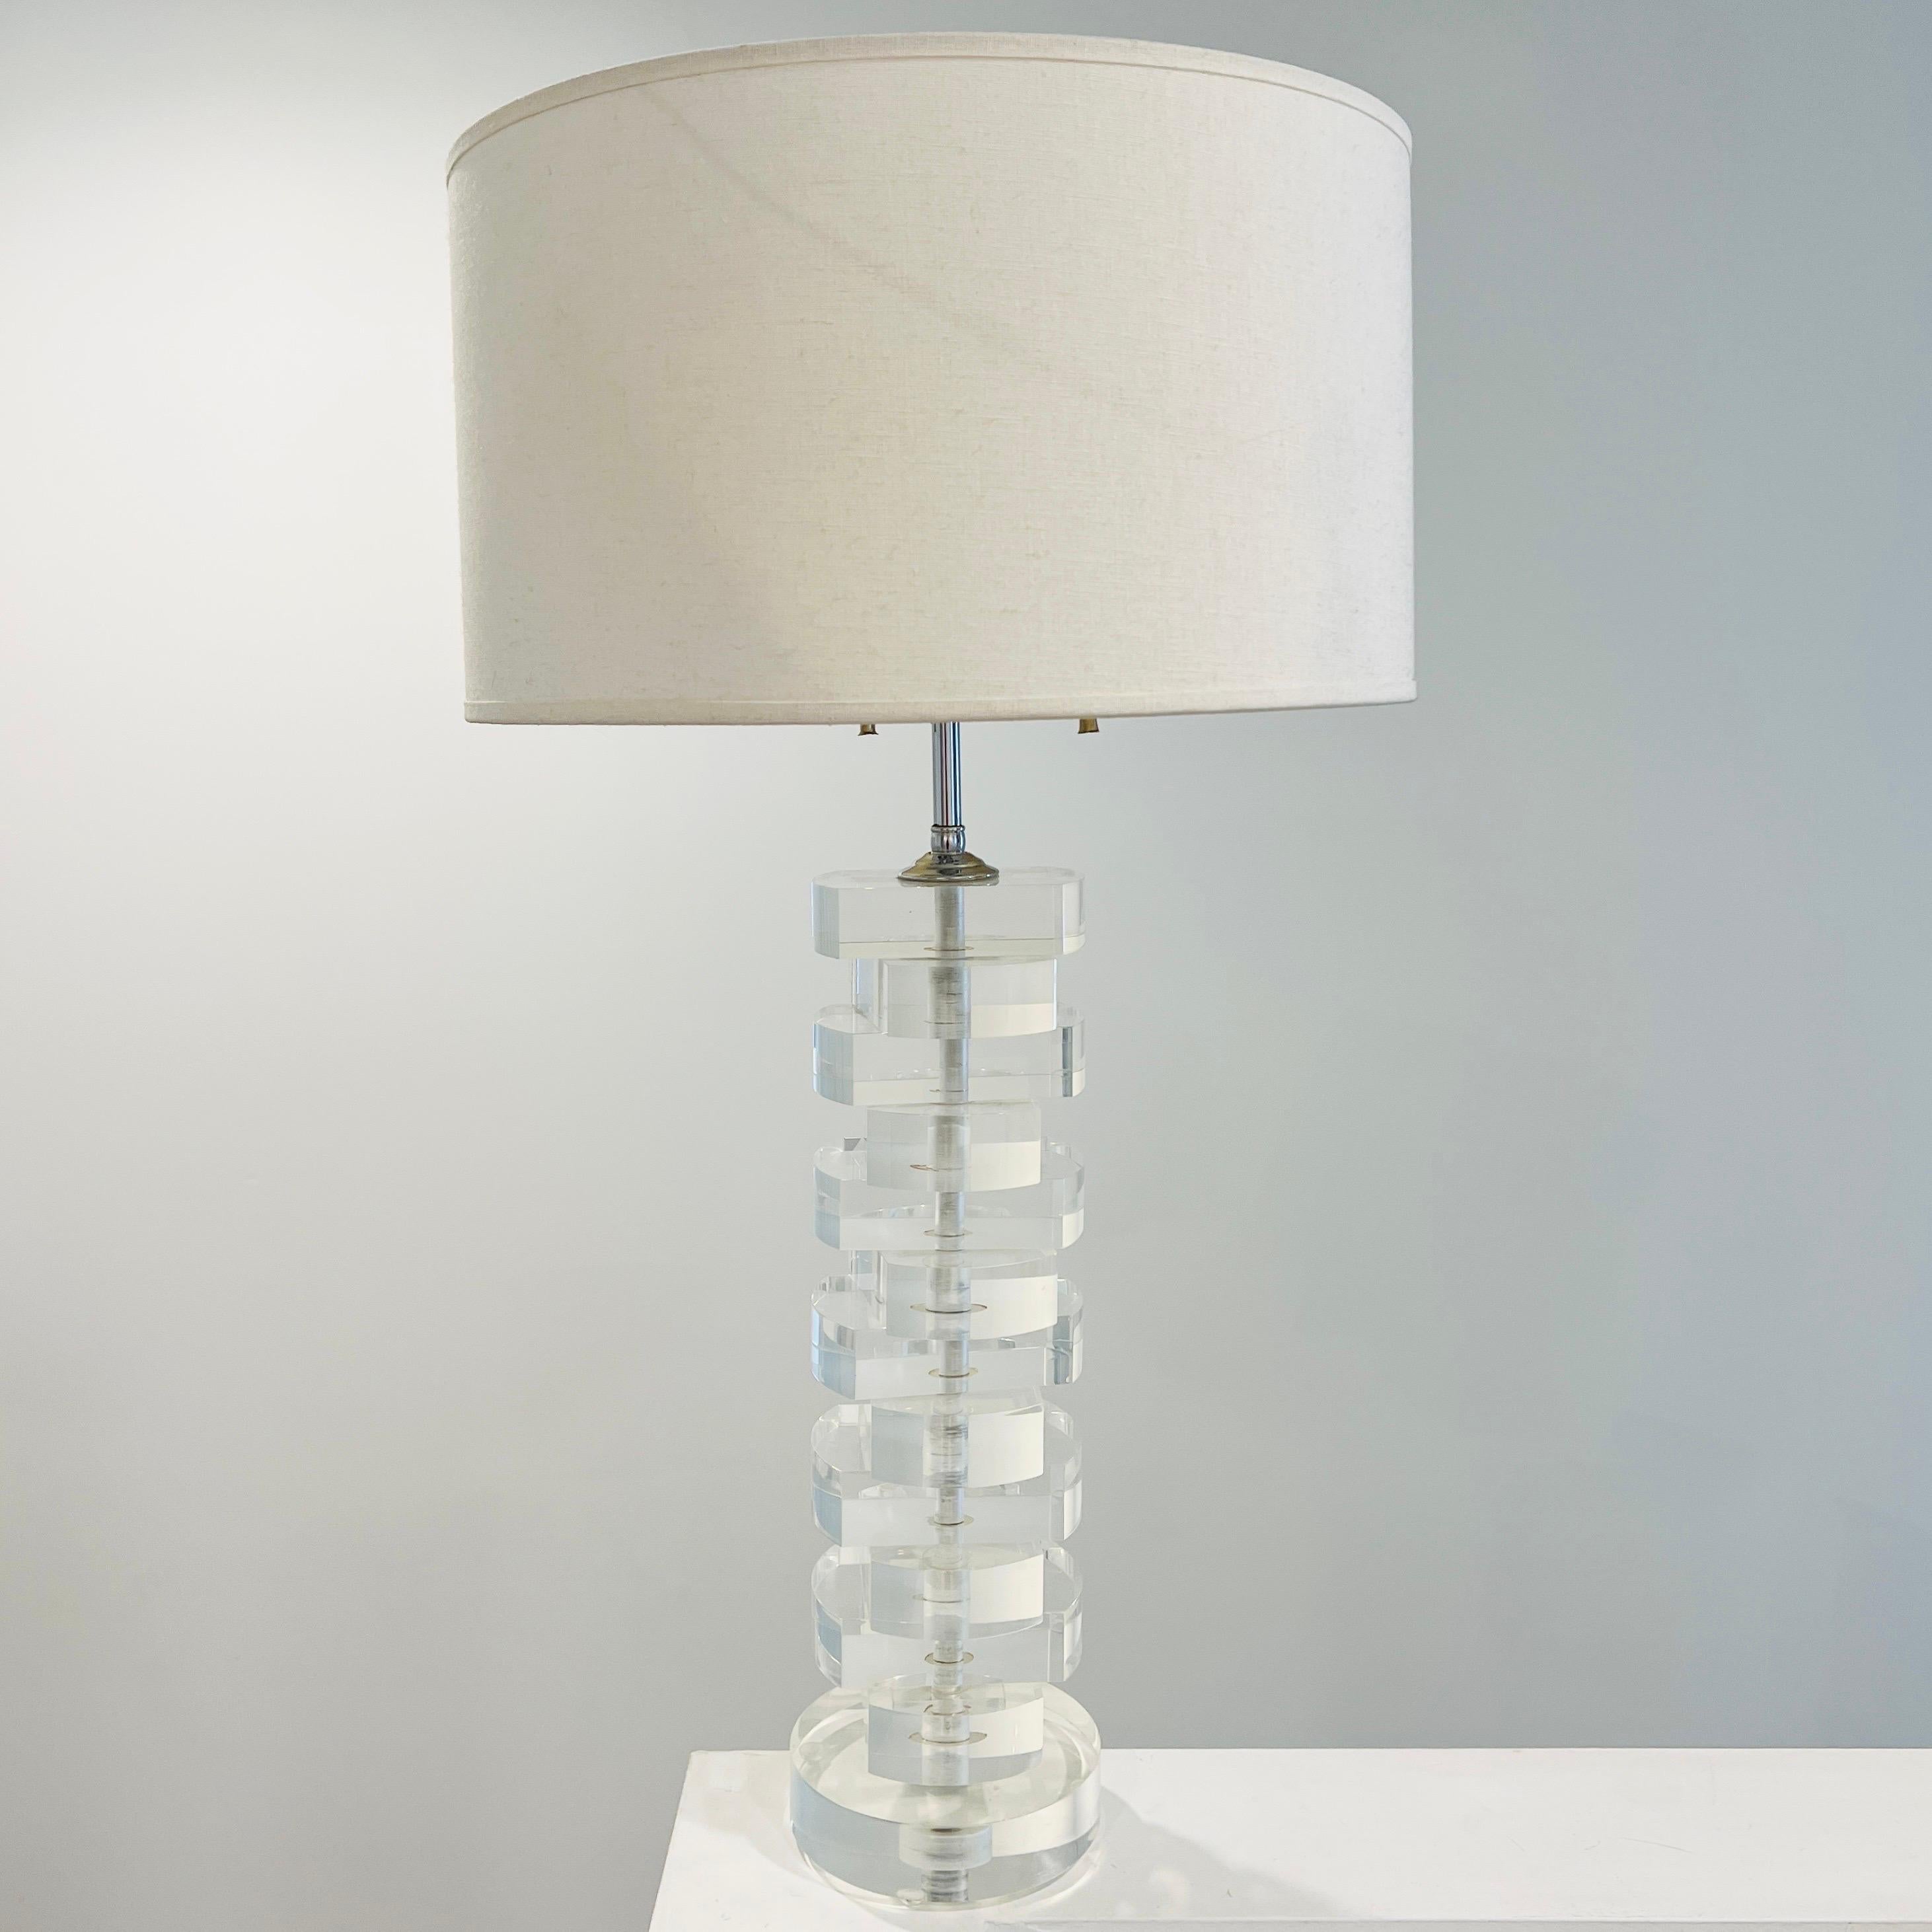 Lucite and Chrome Table Lamp by Karl Springer, c. 1970's For Sale 3